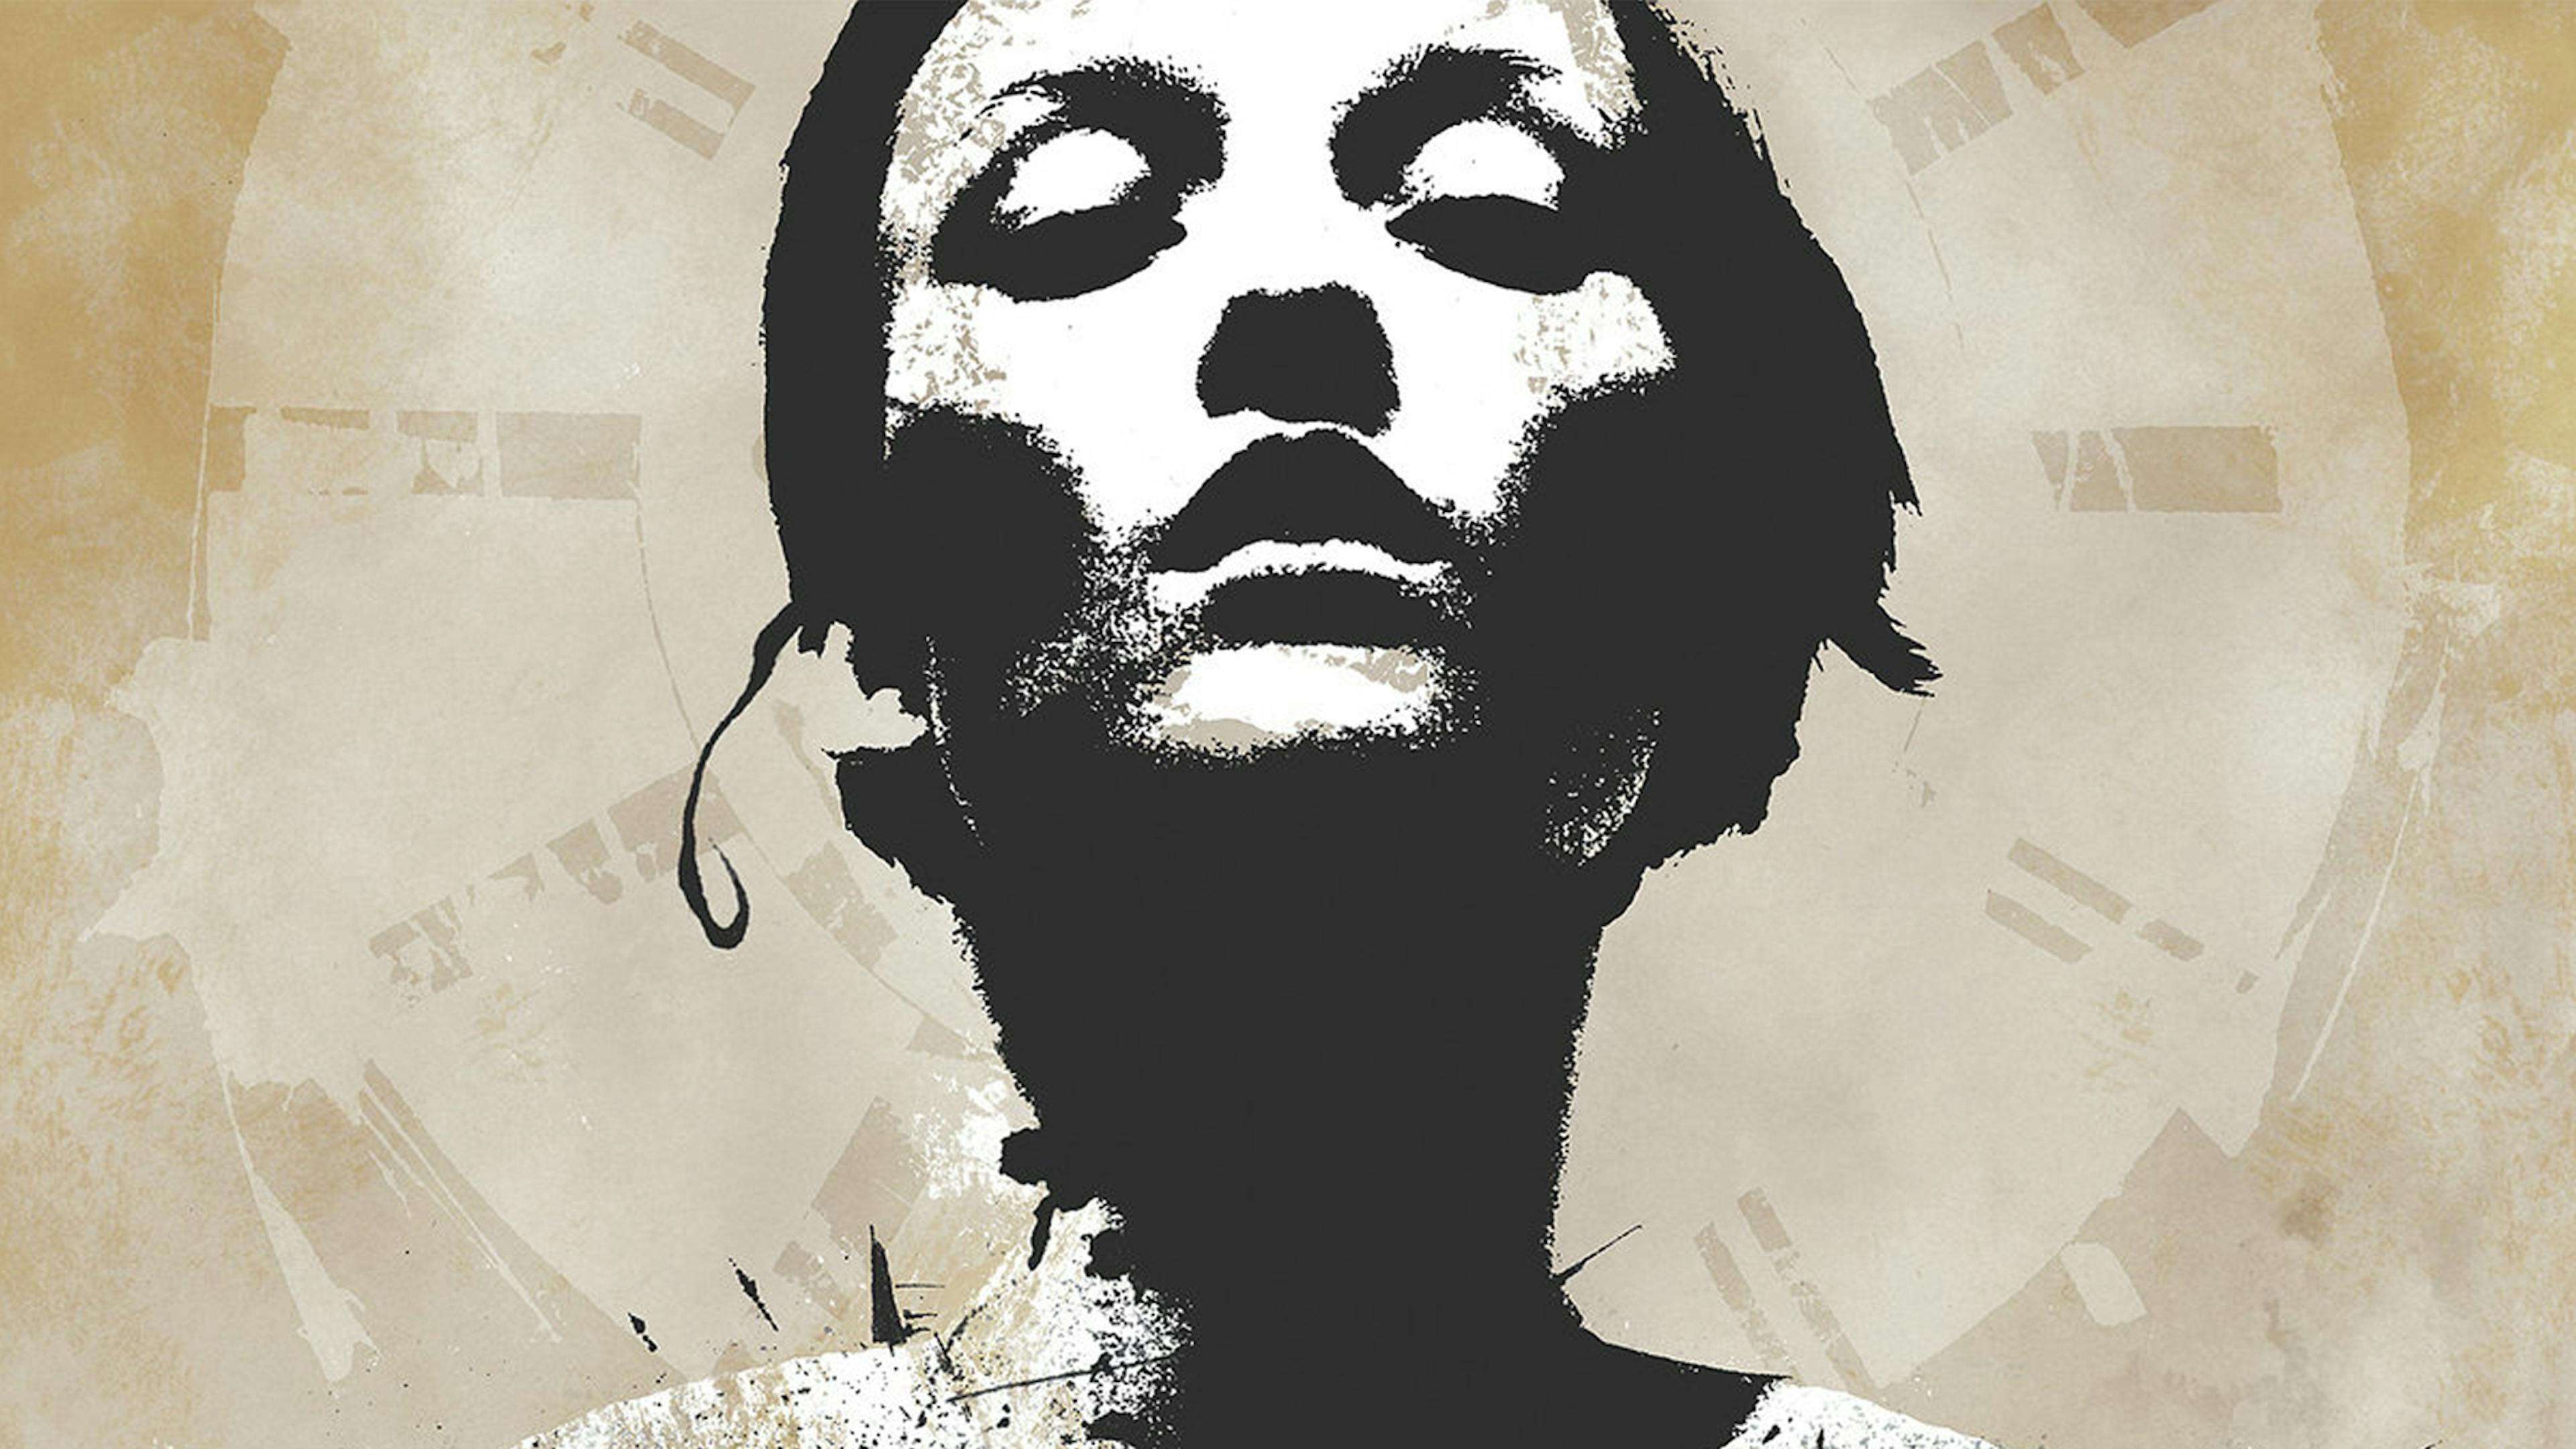 “A revolution in noise”: Our original 2001 review of Converge’s Jane Doe